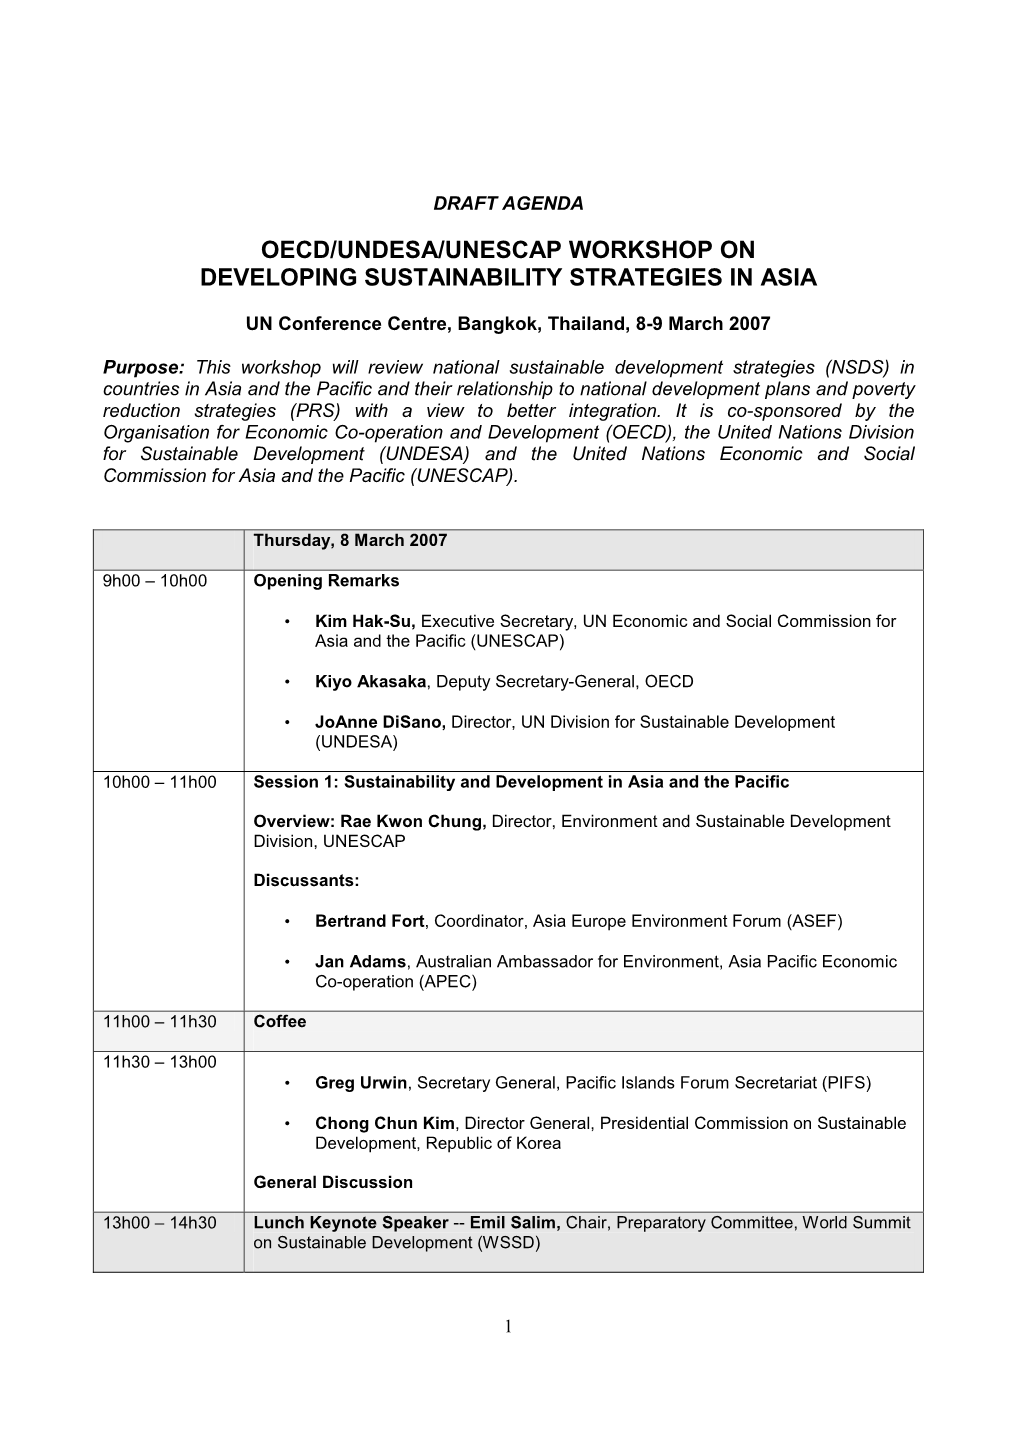 Oecd/Undesa/Unescap Workshop on Developing Sustainability Strategies in Asia